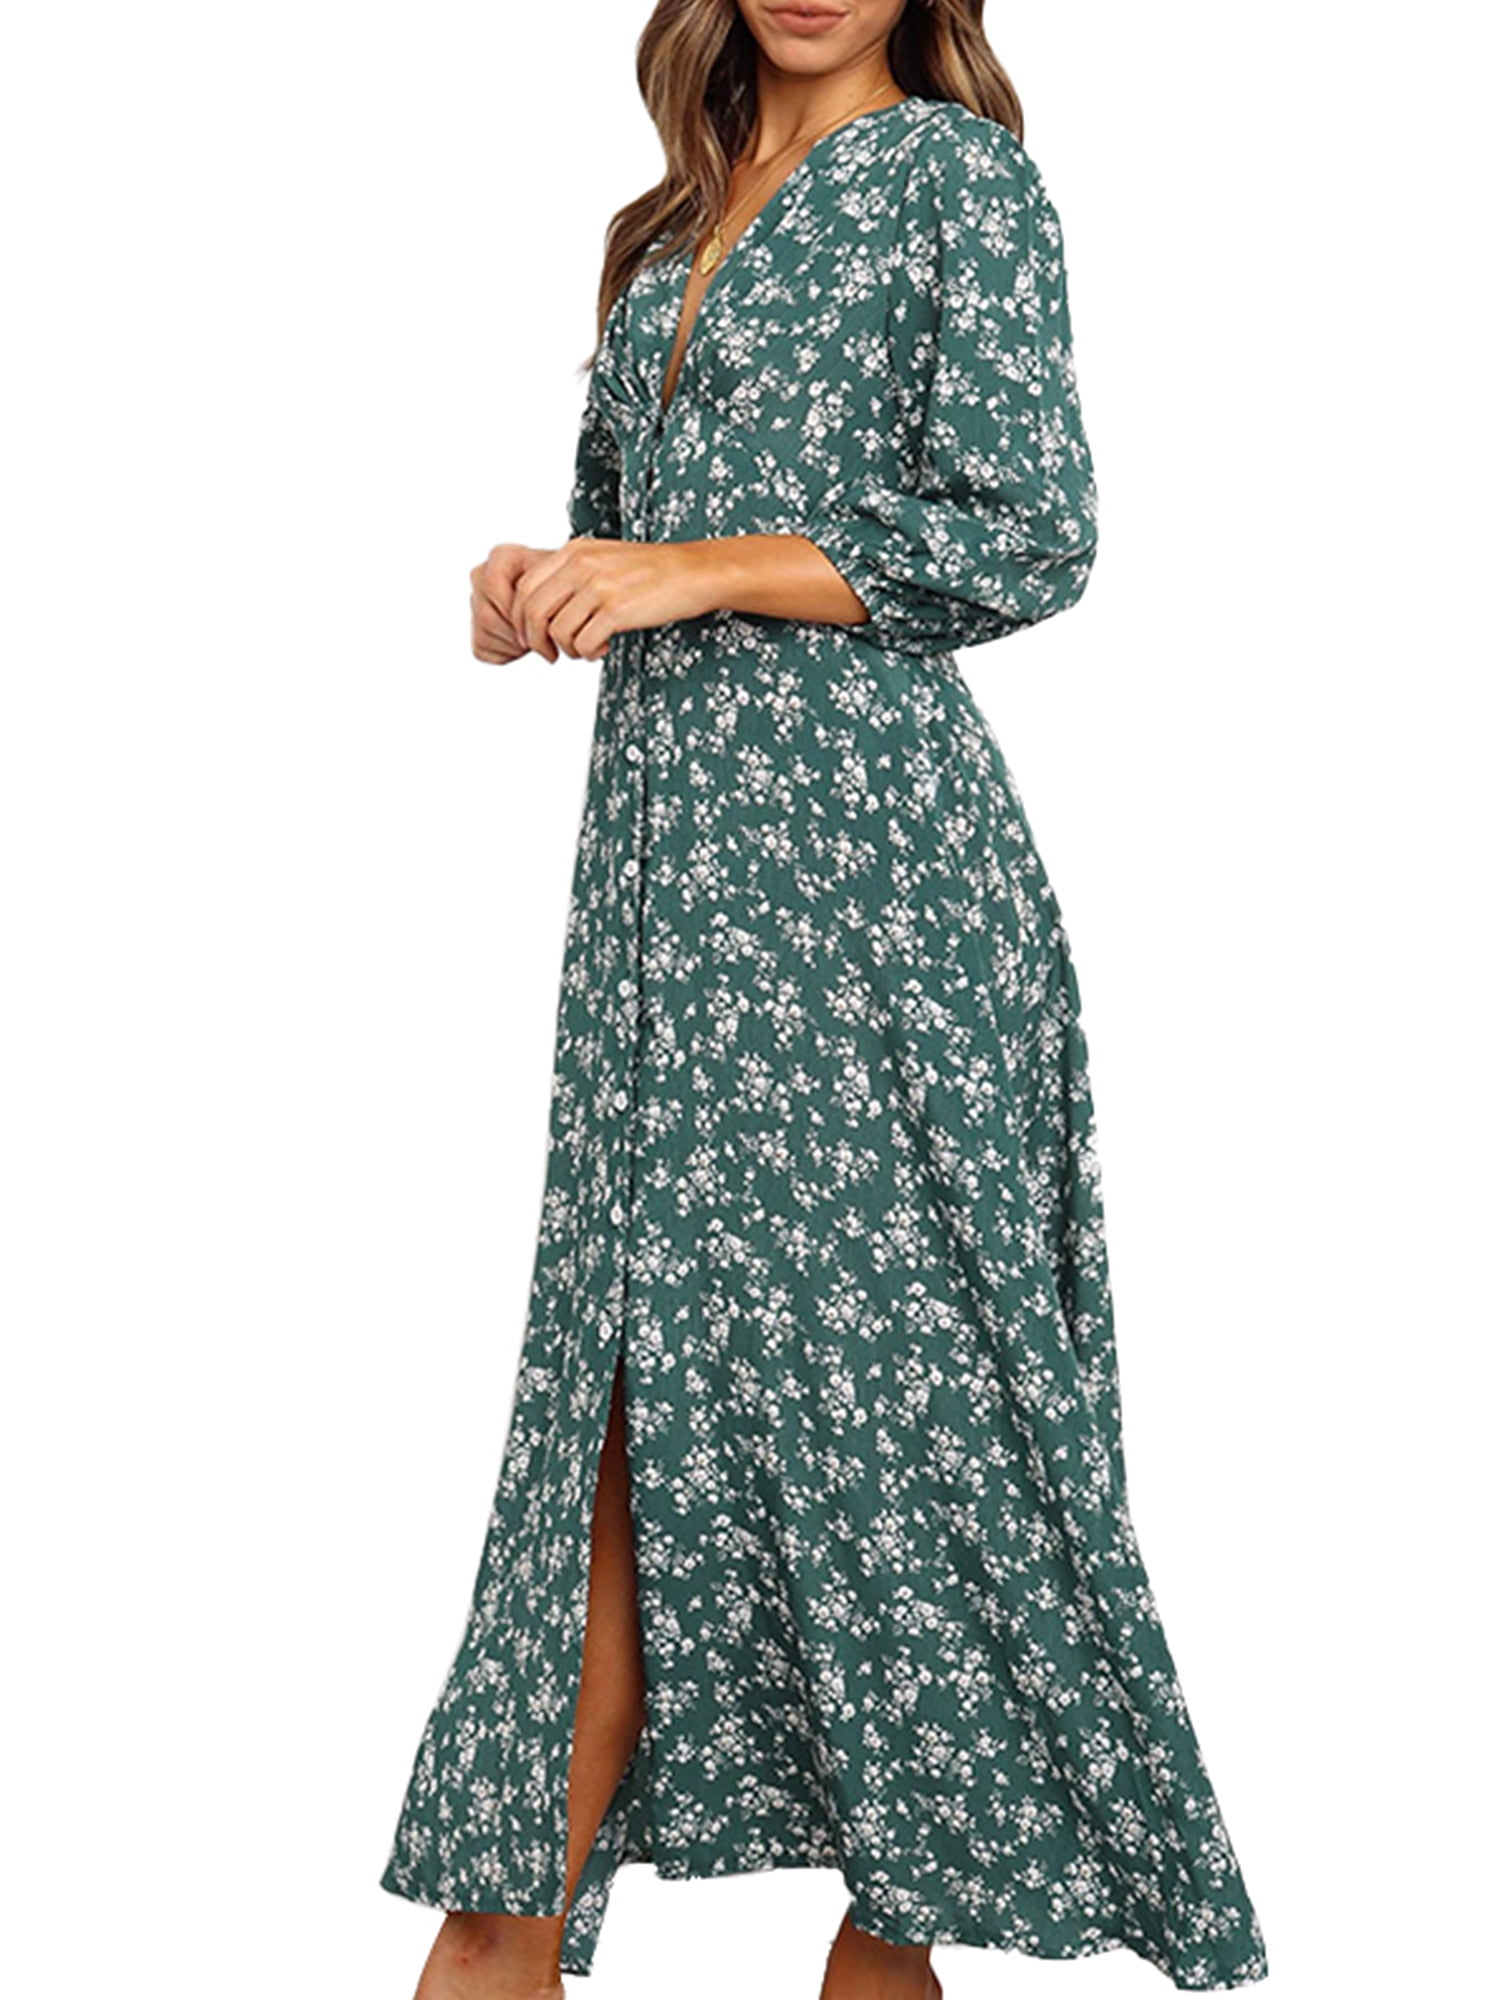 Womens Long Sleeves Button Up Floral Print Flowy Party Maxi Shirt Dress